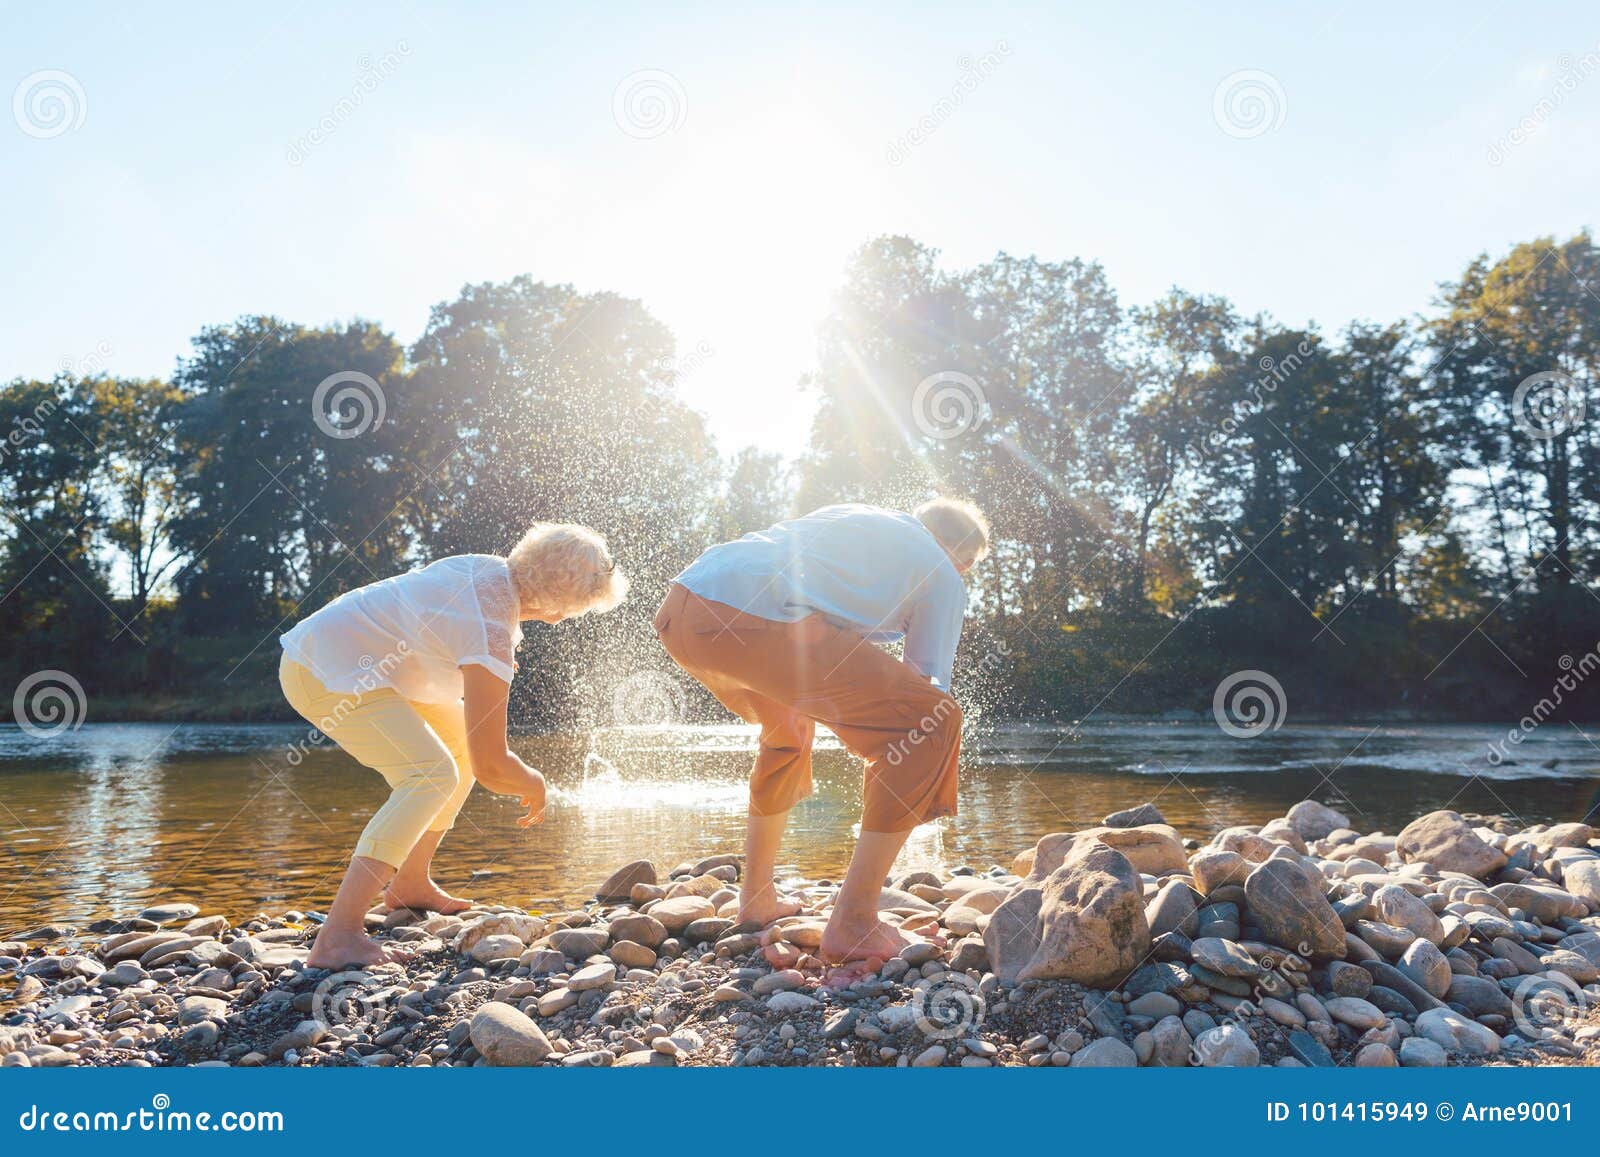 two senior people enjoying retirement and simplicity while throw